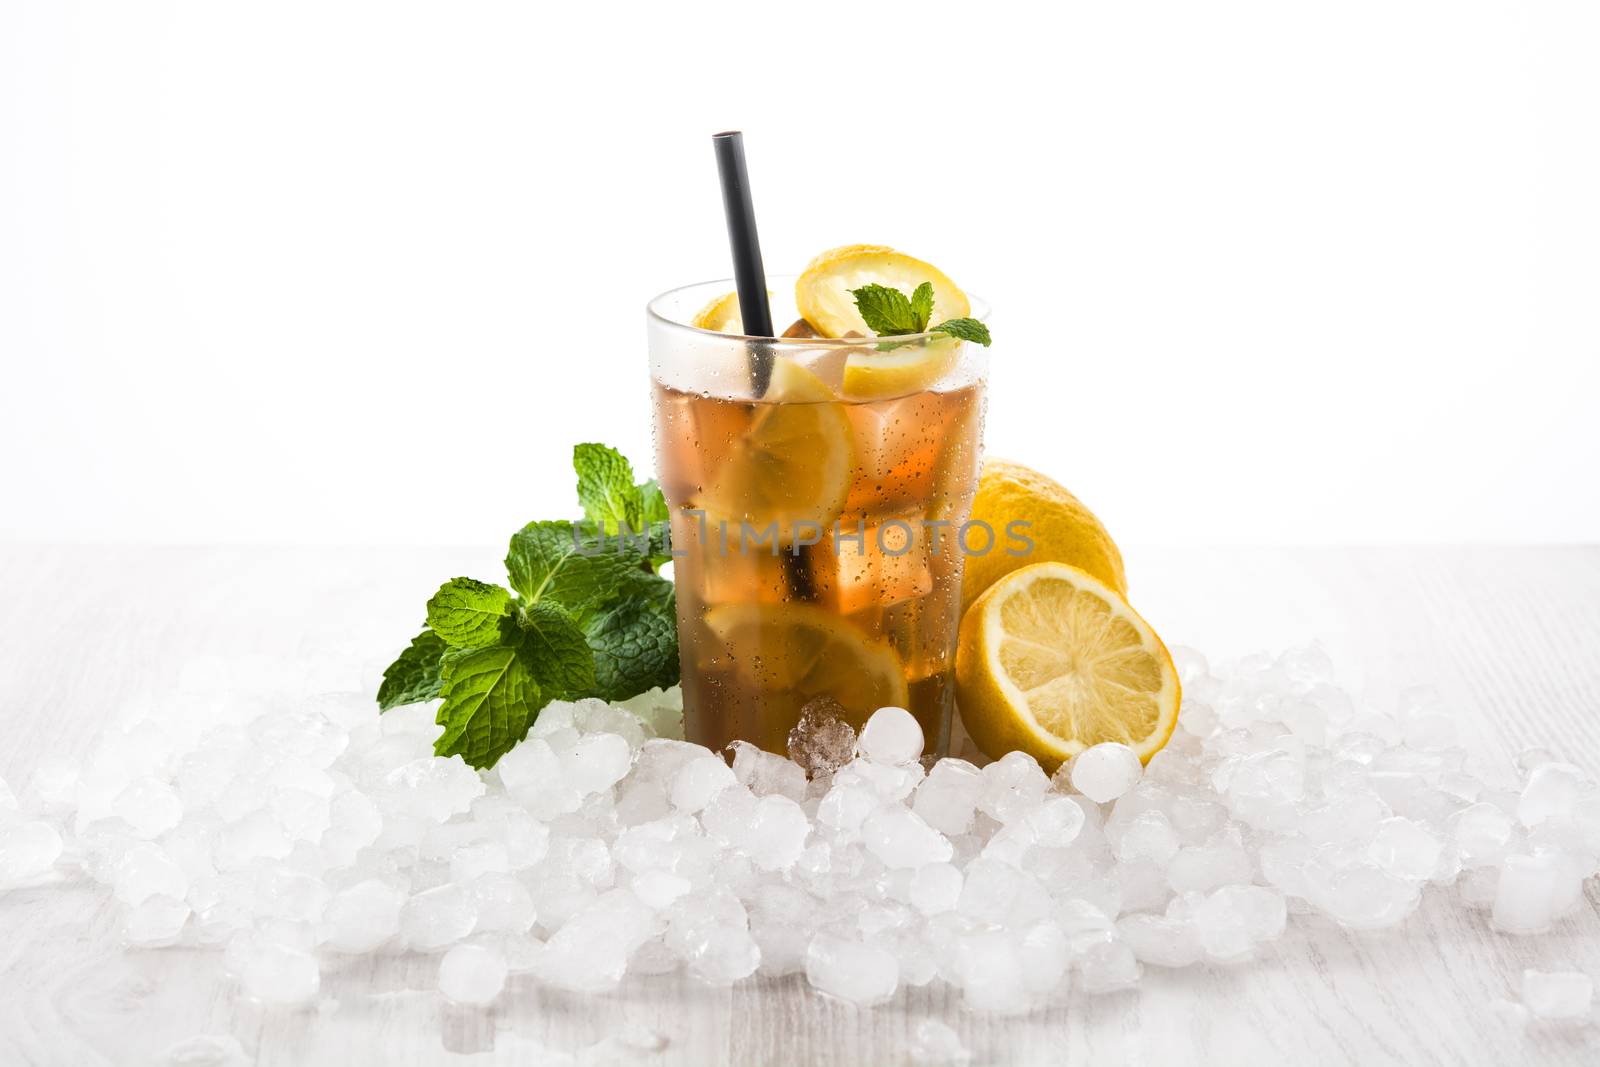 Iced tea drink with lemon in glass  by chandlervid85